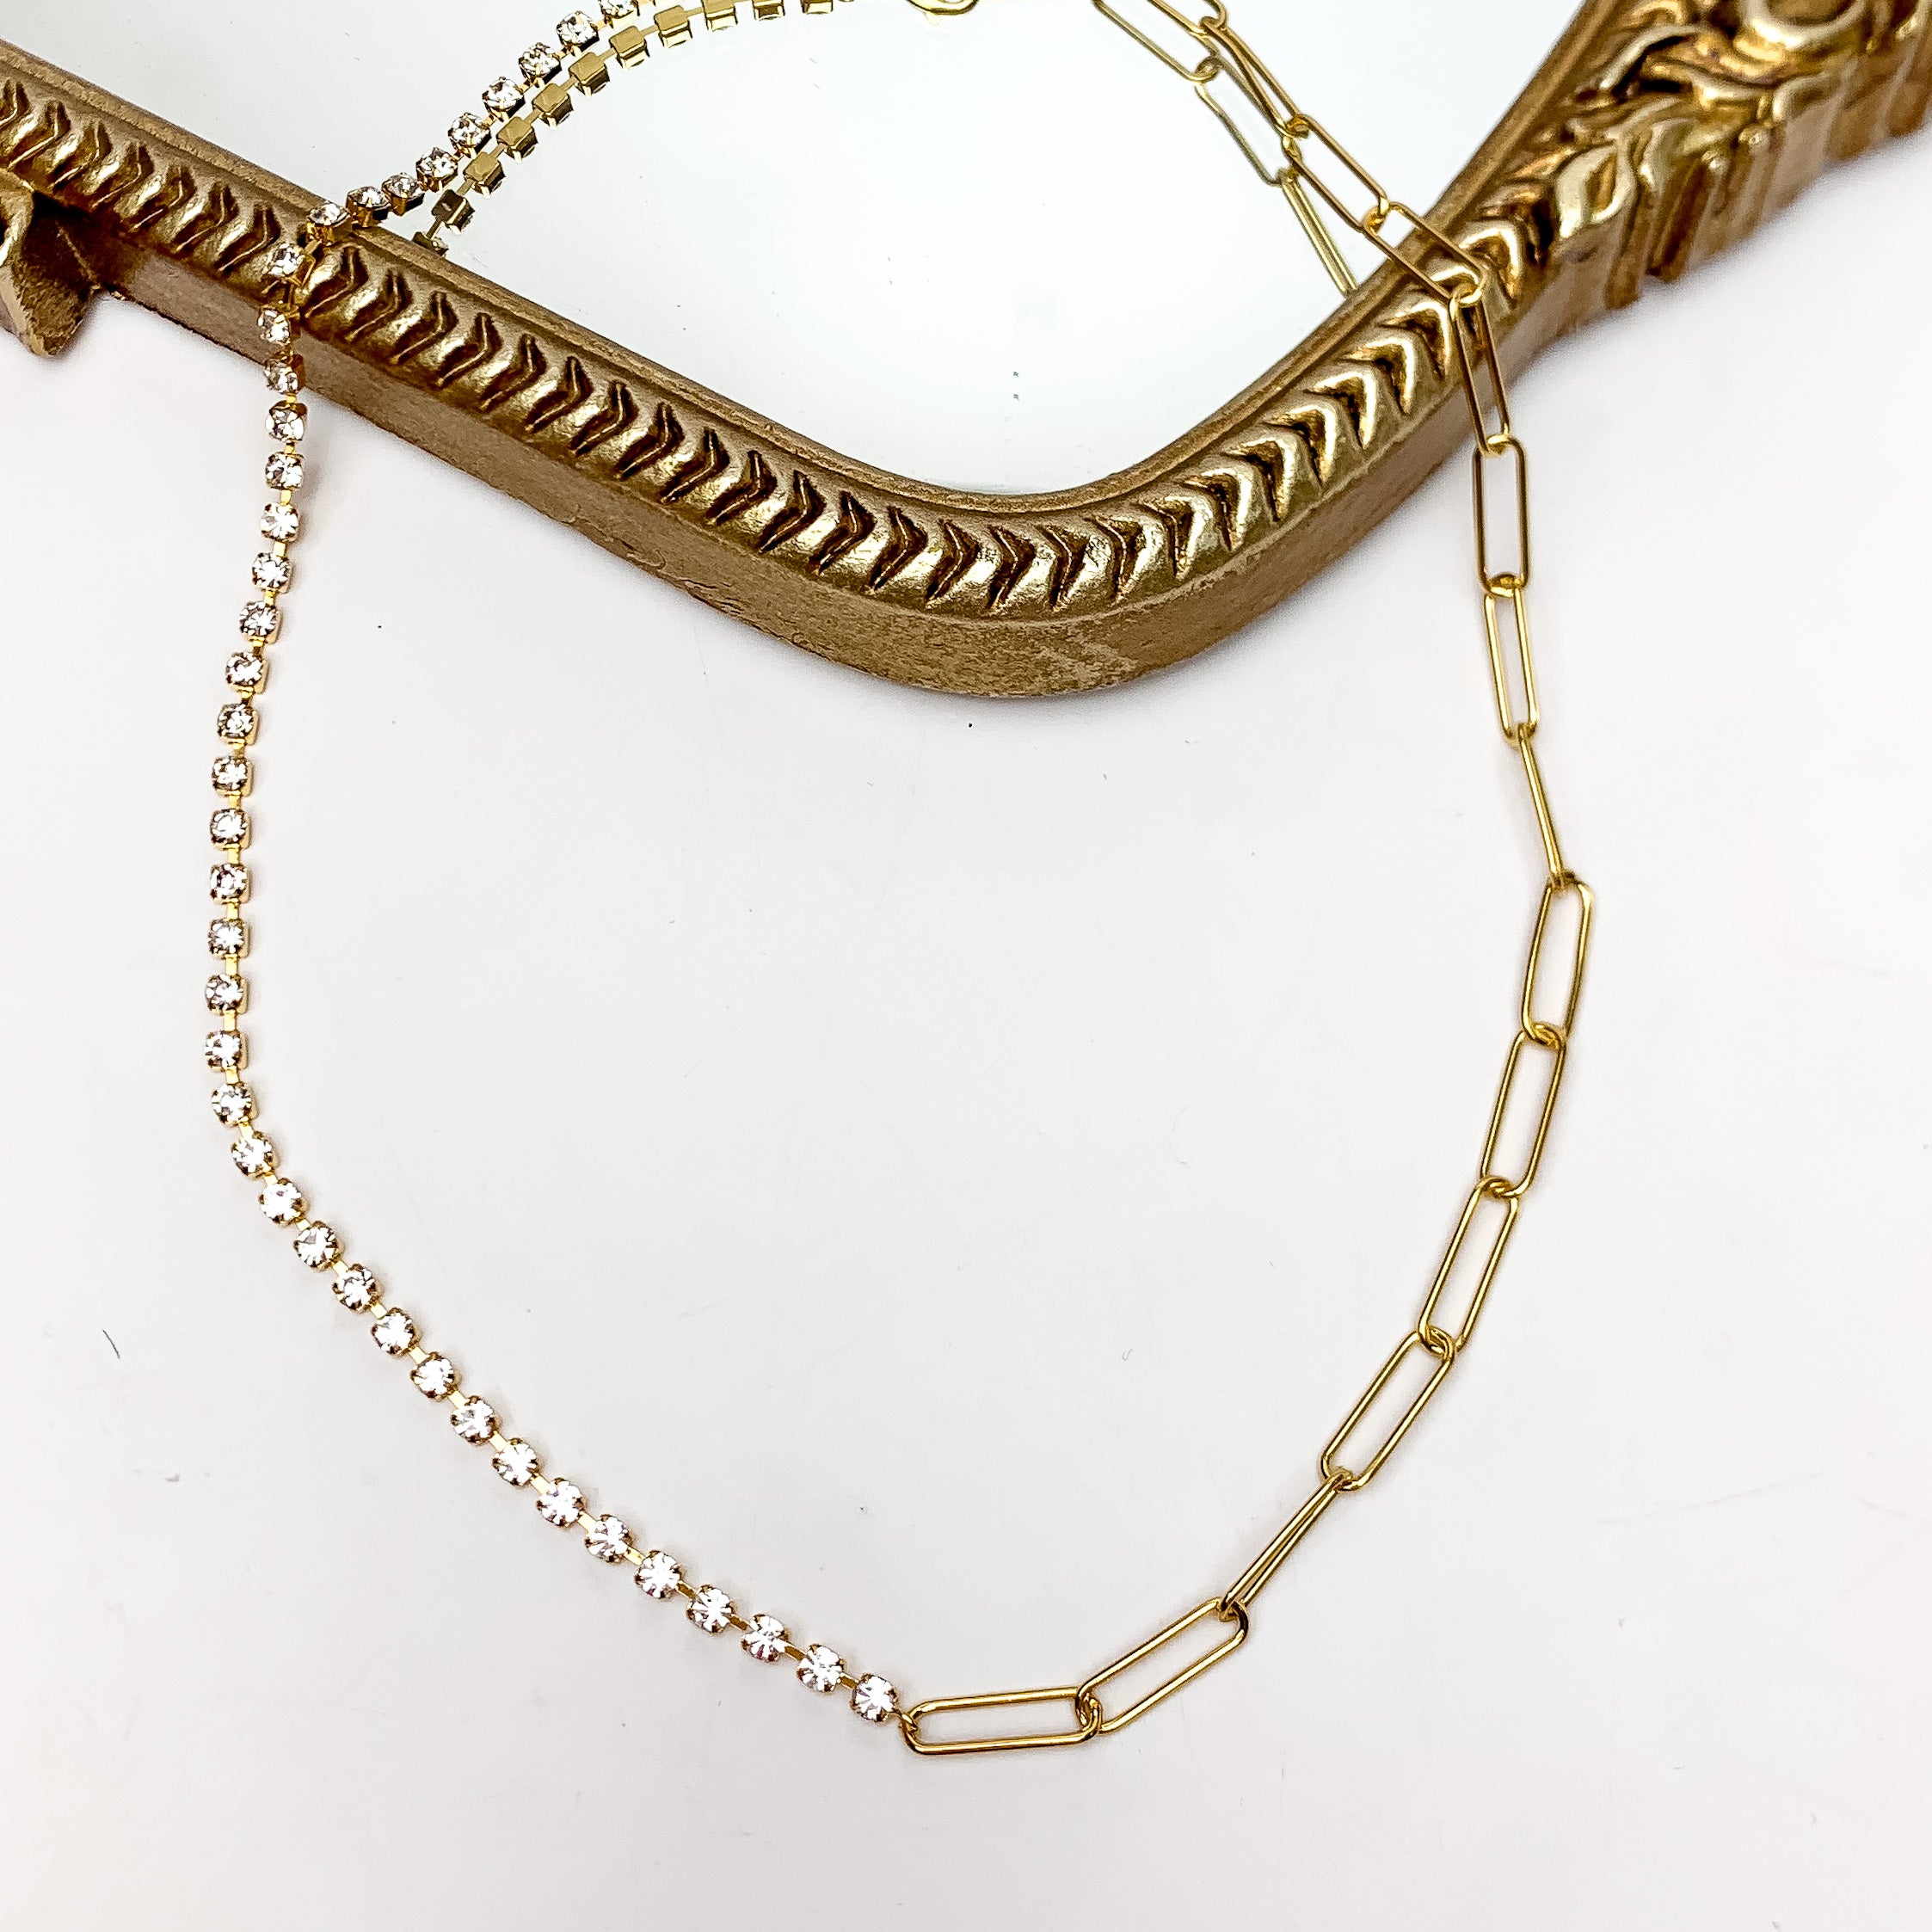 Drama Queen Gold Tone Necklace With Clear Crystals. This necklace is pictured on a white background with part of it on a gold trimmed mirror.